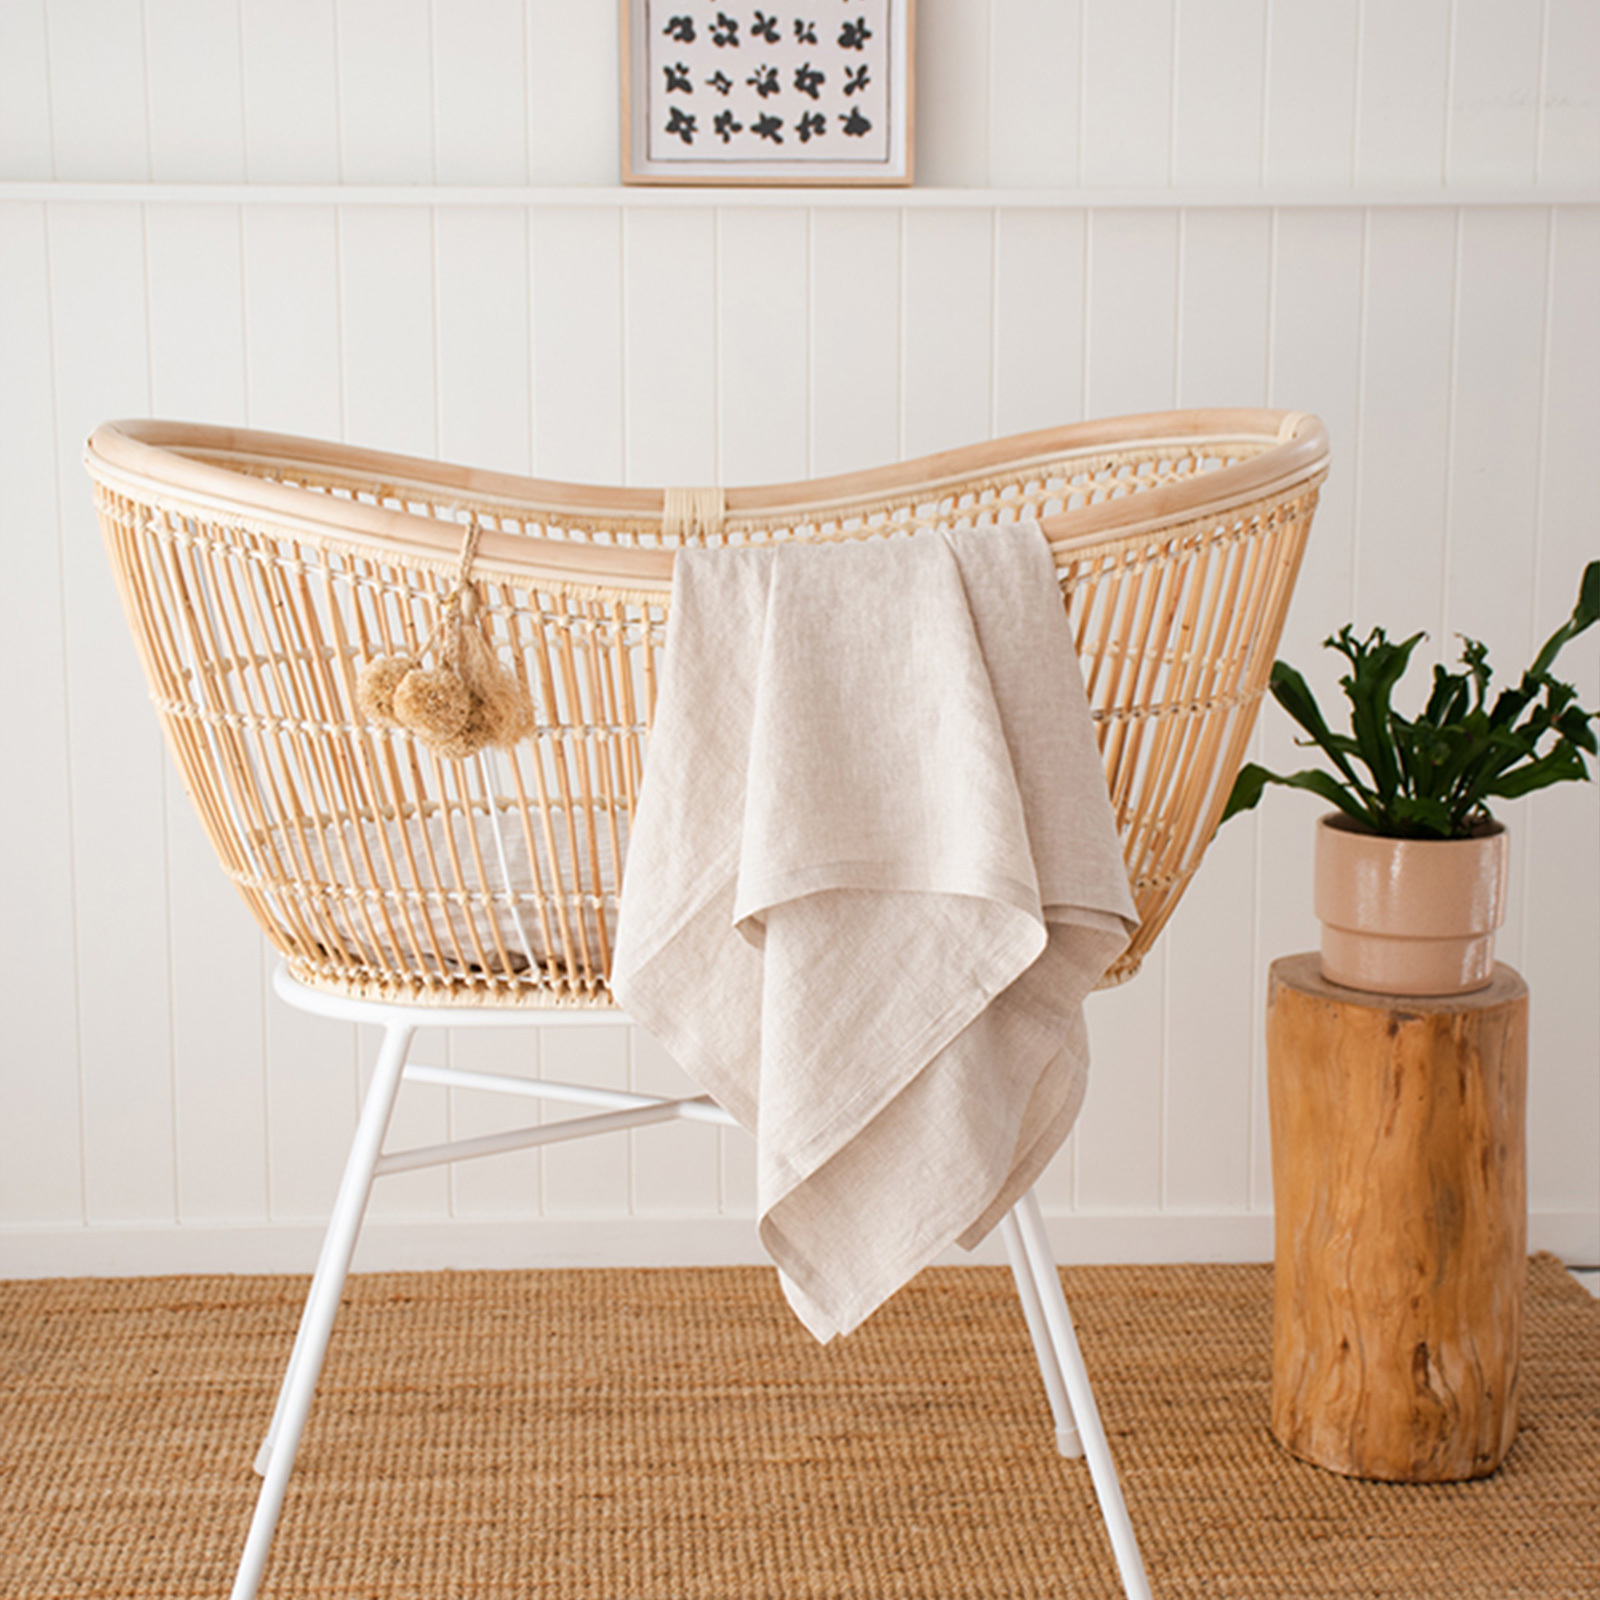 Natural French linen Swaddle